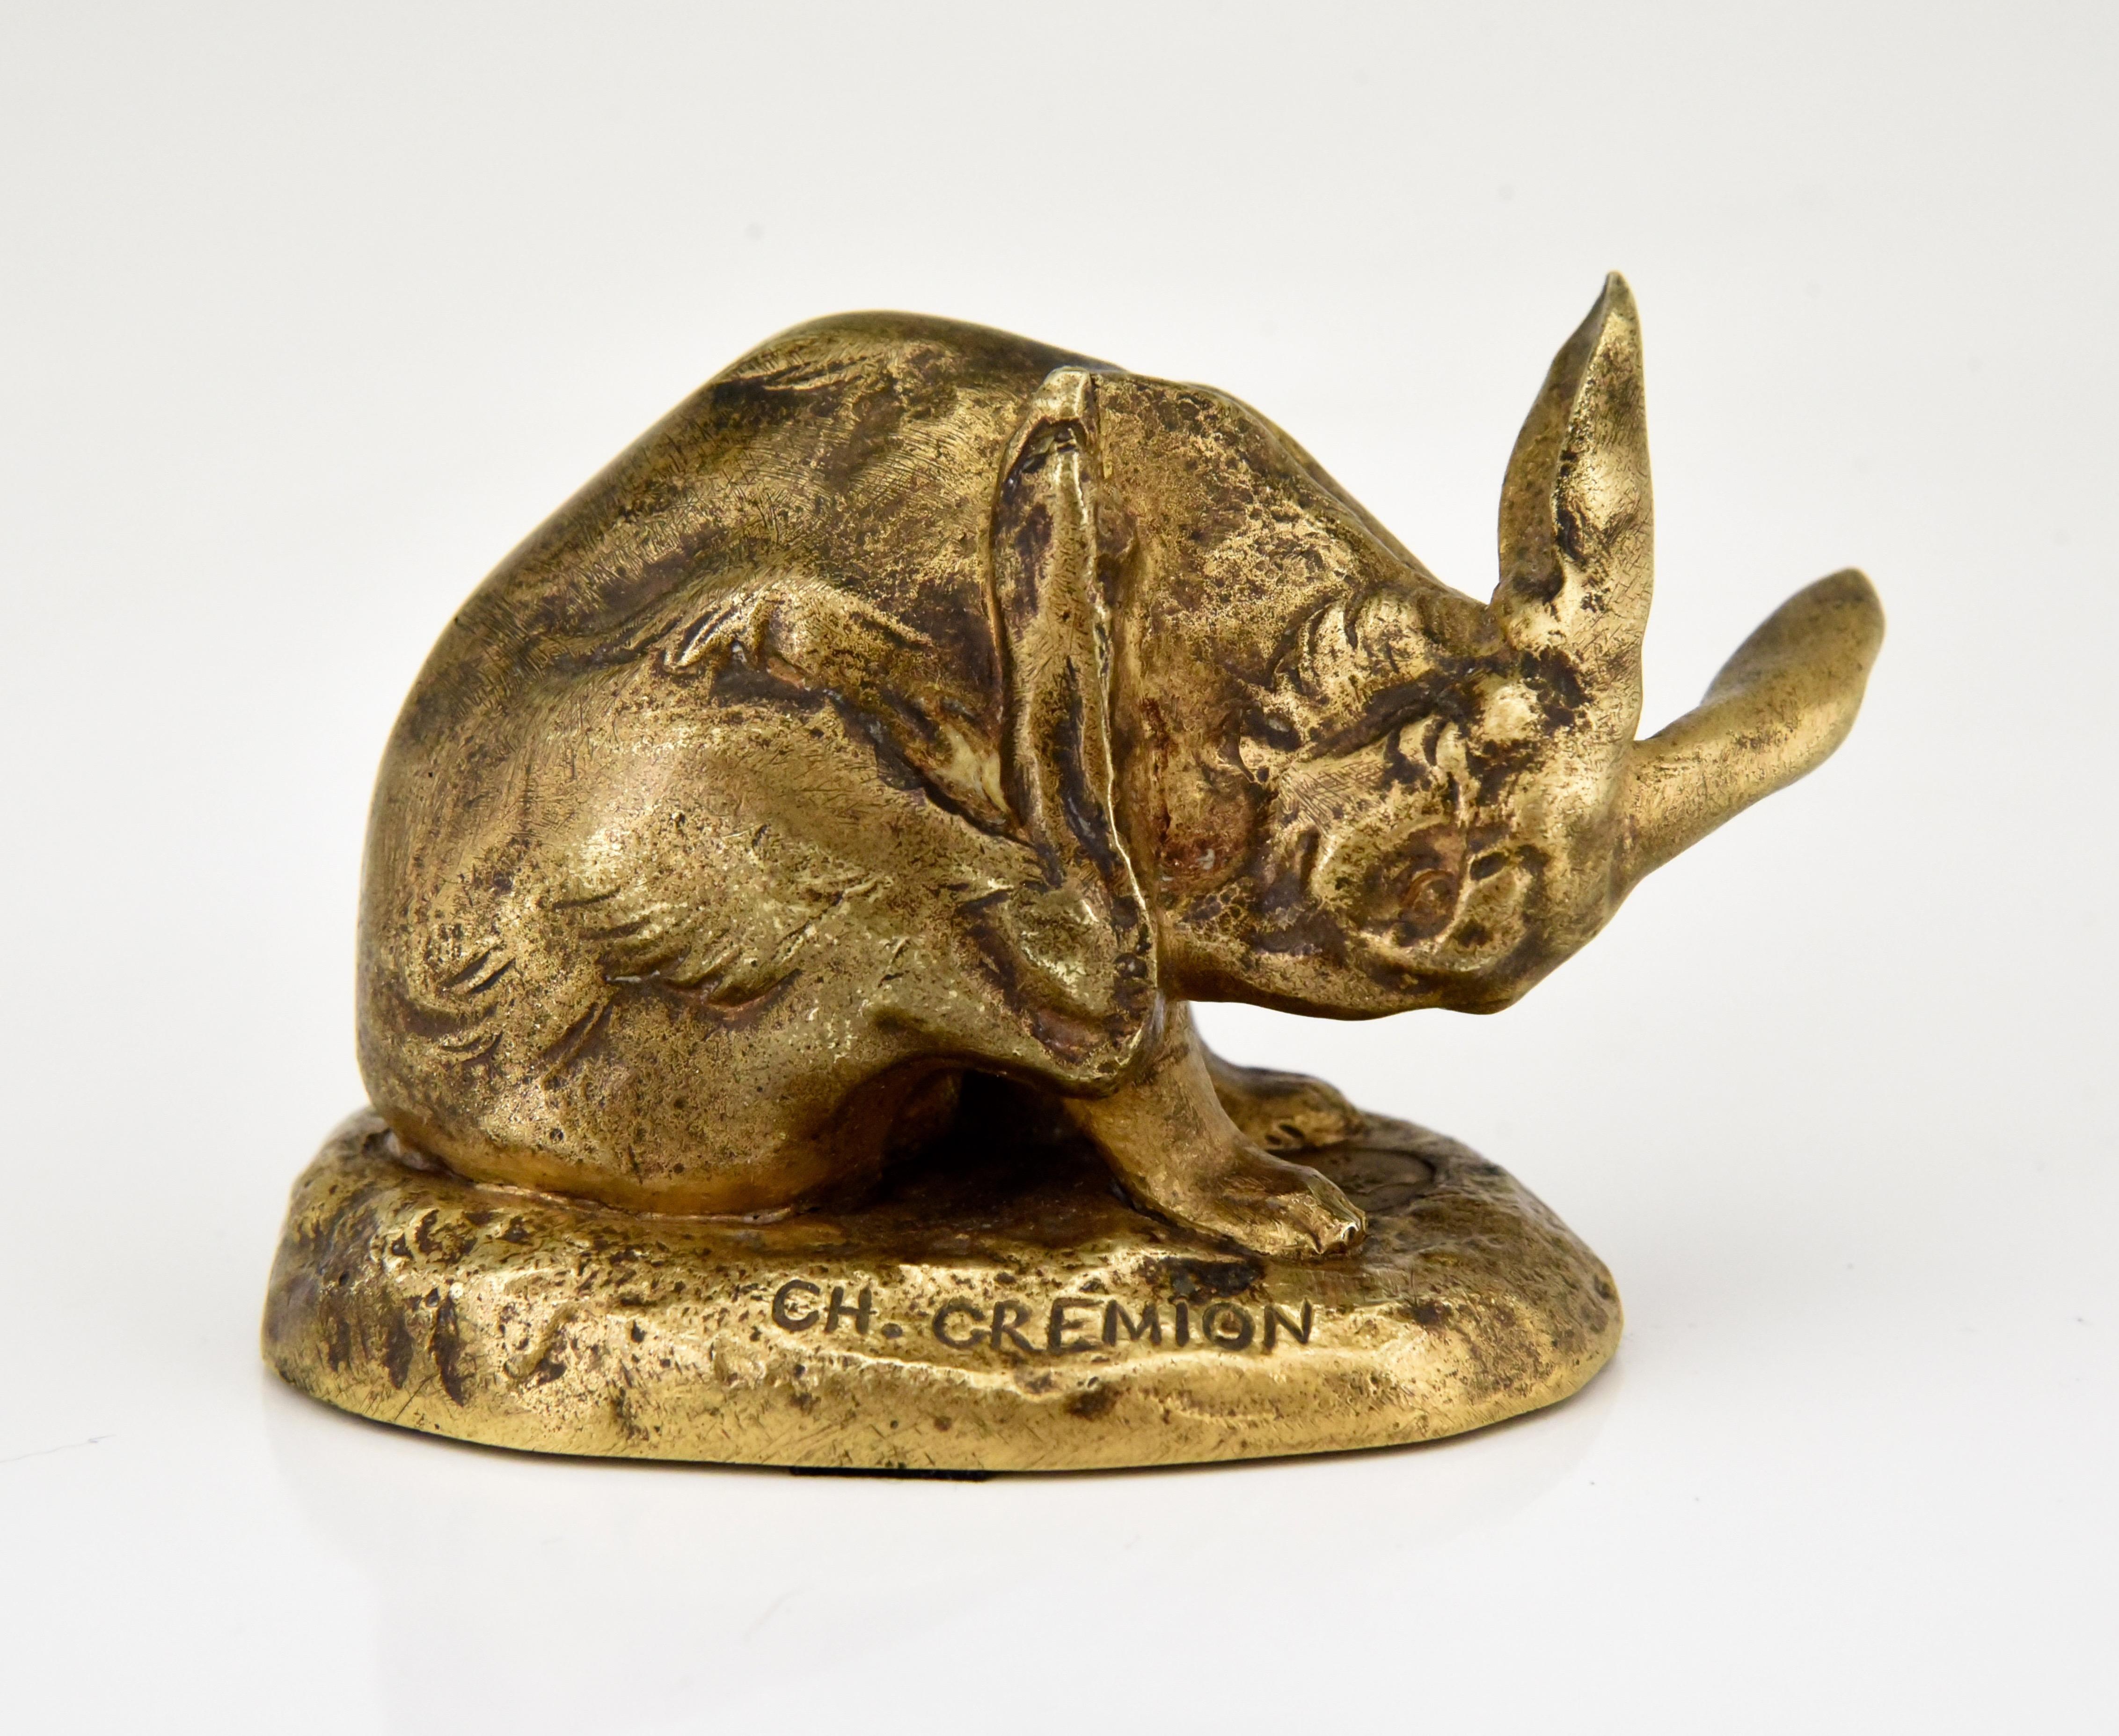 Antique Bronze Sculpture of a Hare Washing Charles Gremion, France, 1900 4